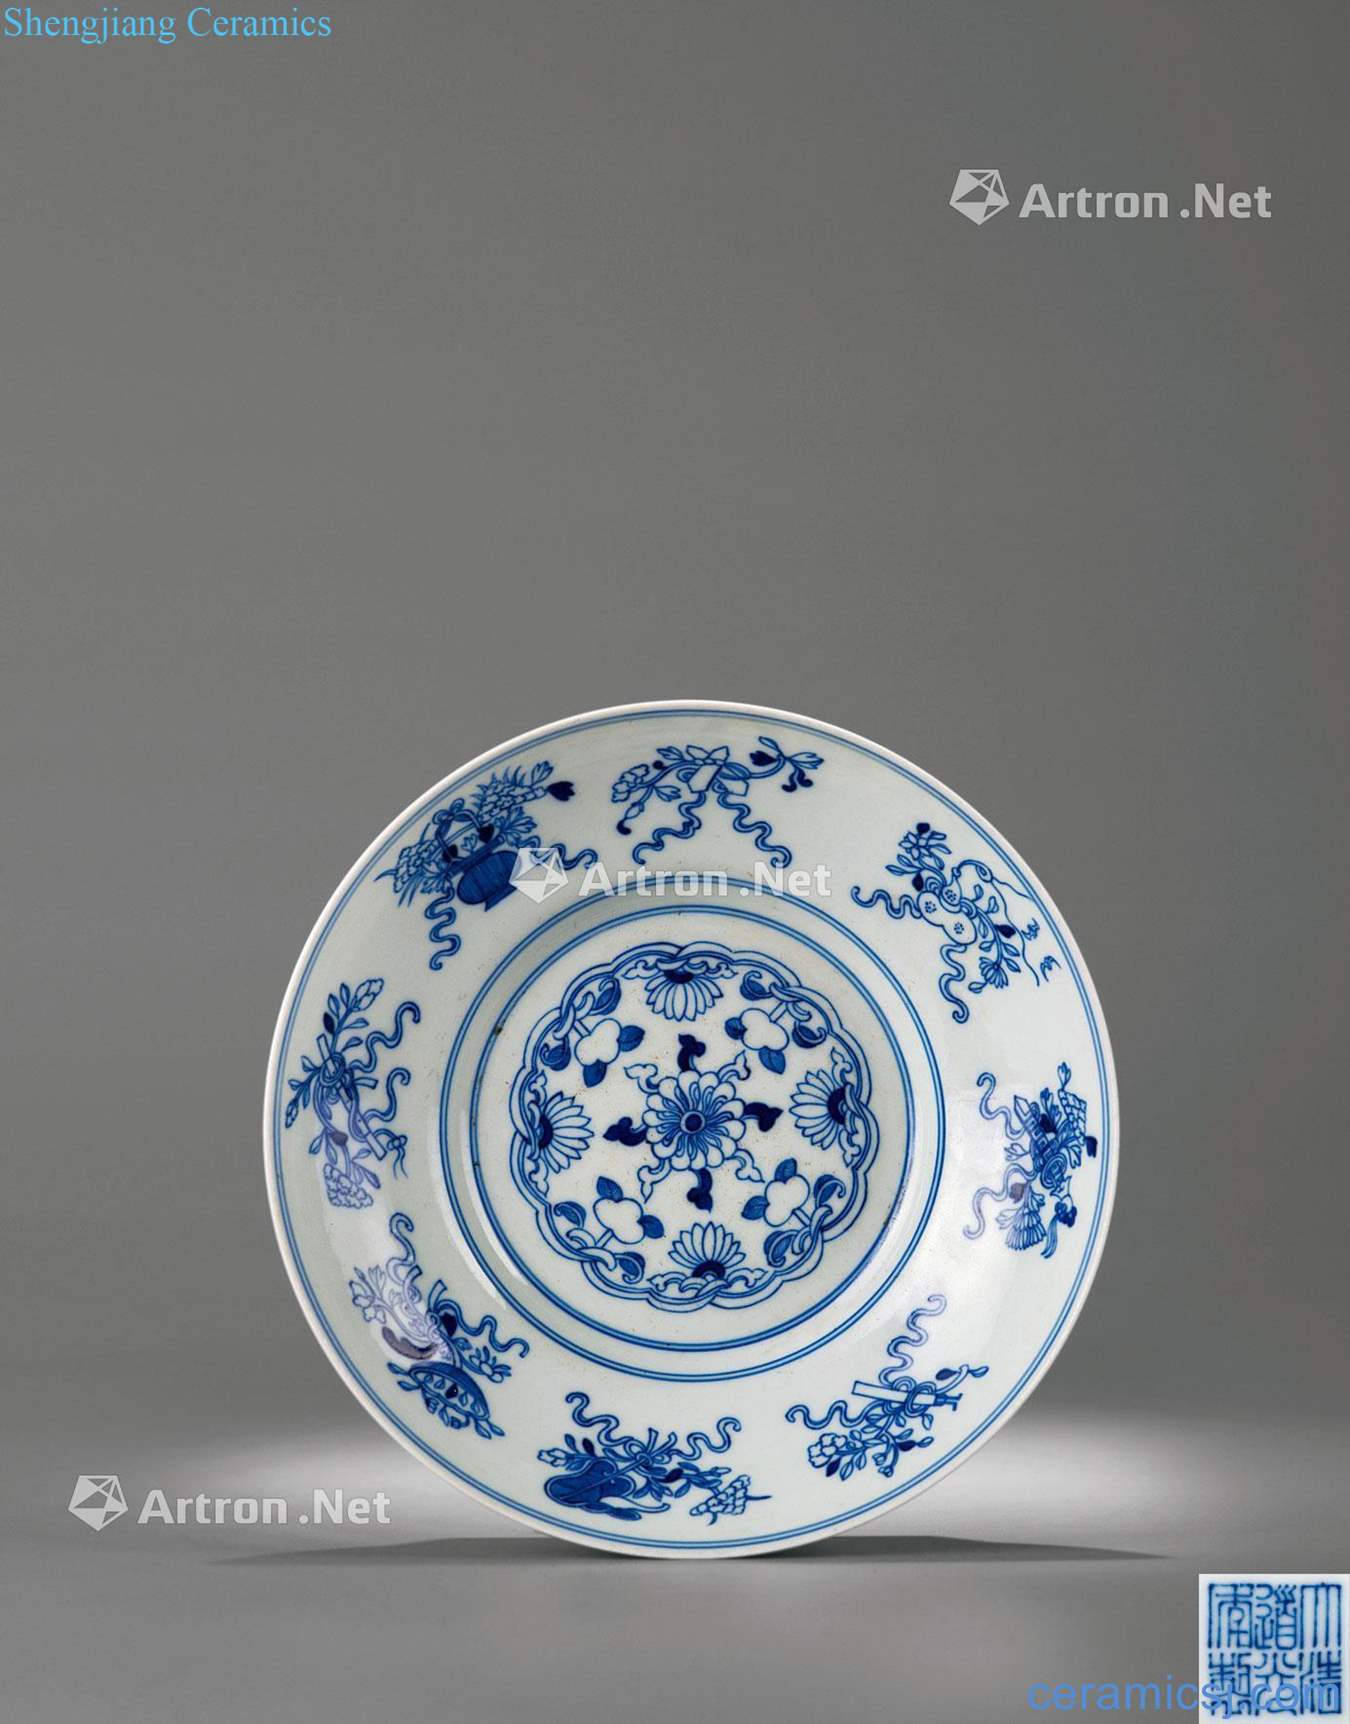 Qing daoguang Blue and white light tracing in a tray